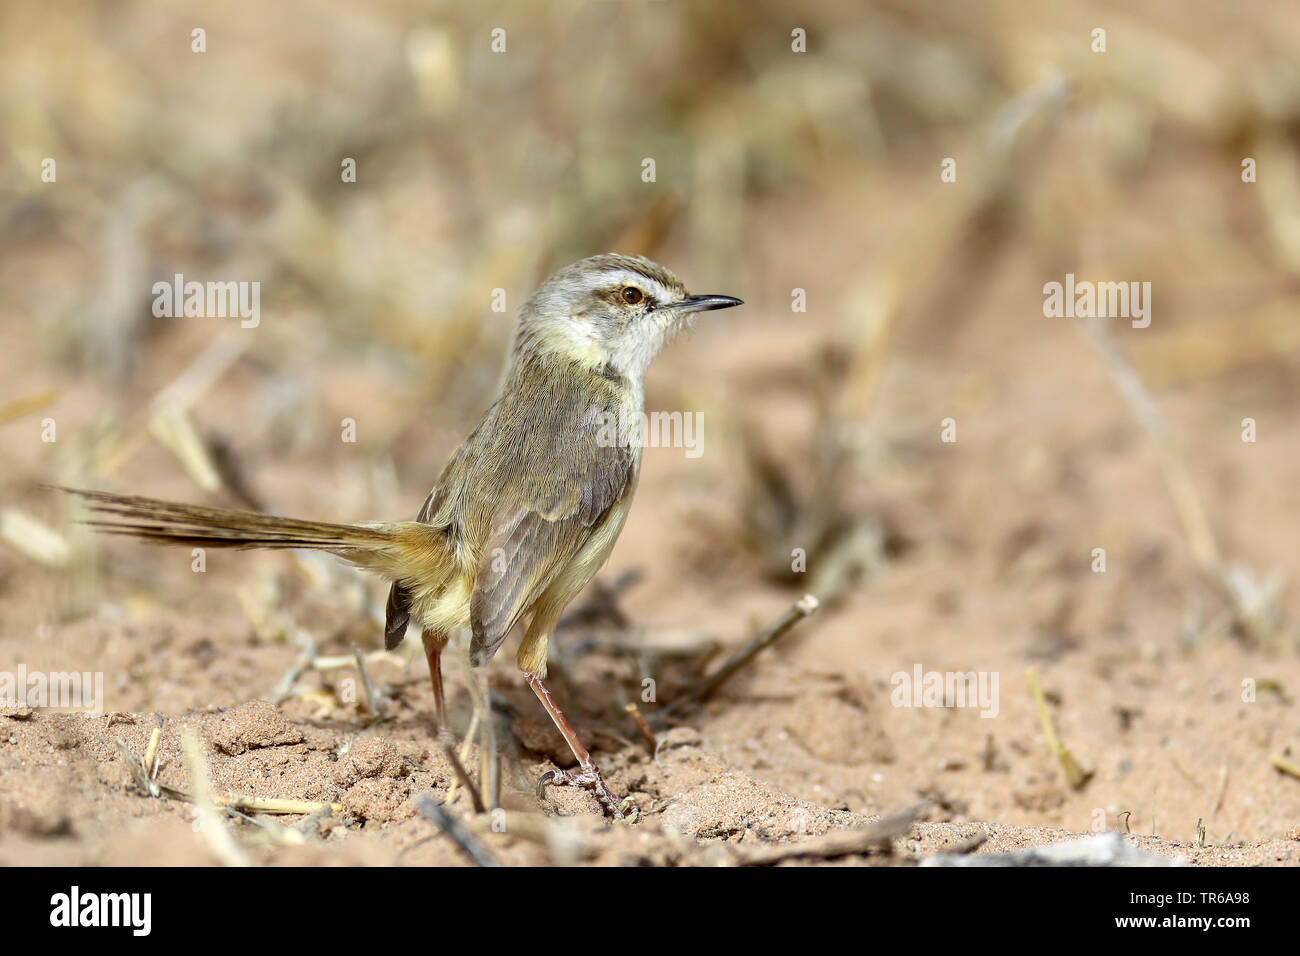 Black-chested prinia (Prinia flavicans), on the ground, South Africa, Kgalagadi Transfrontier National Park Stock Photo